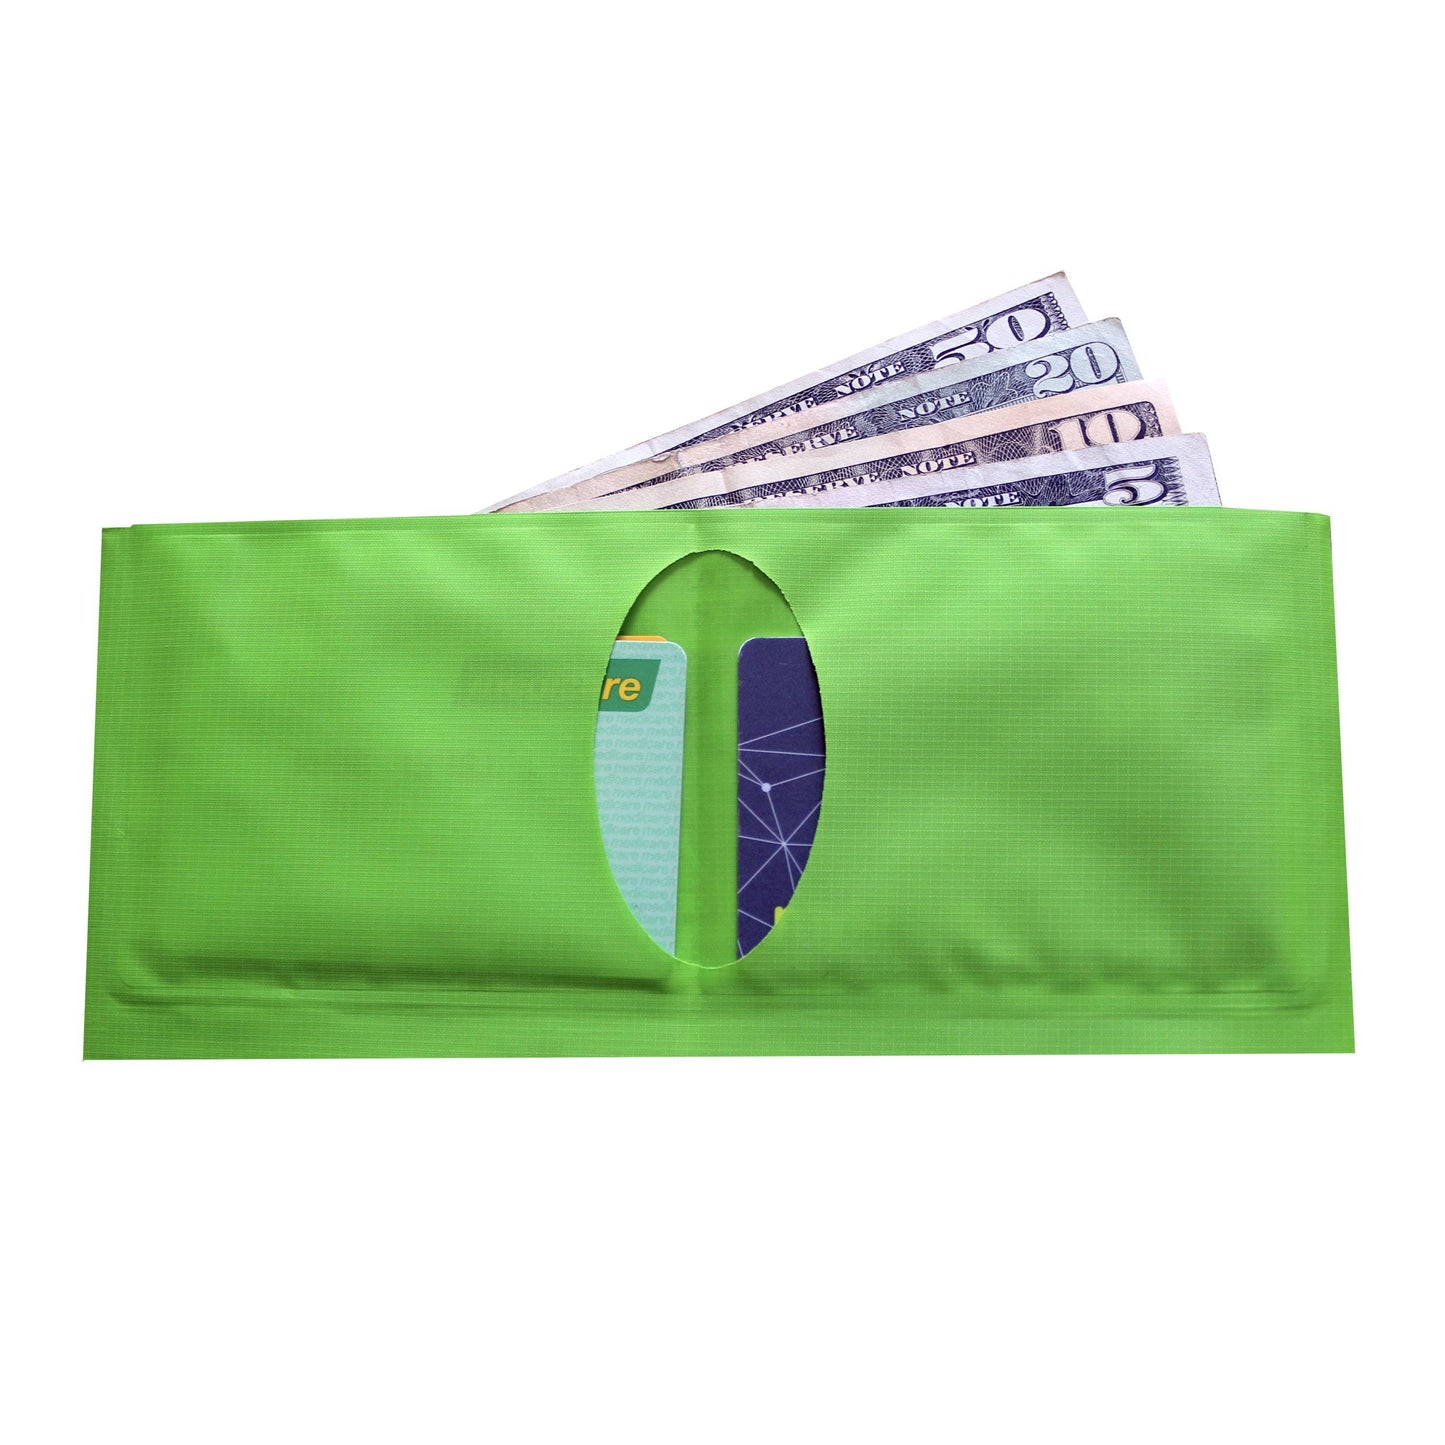 Scrubba Weightless Wallet - ships from Australia - The Scrubba Wash Bag